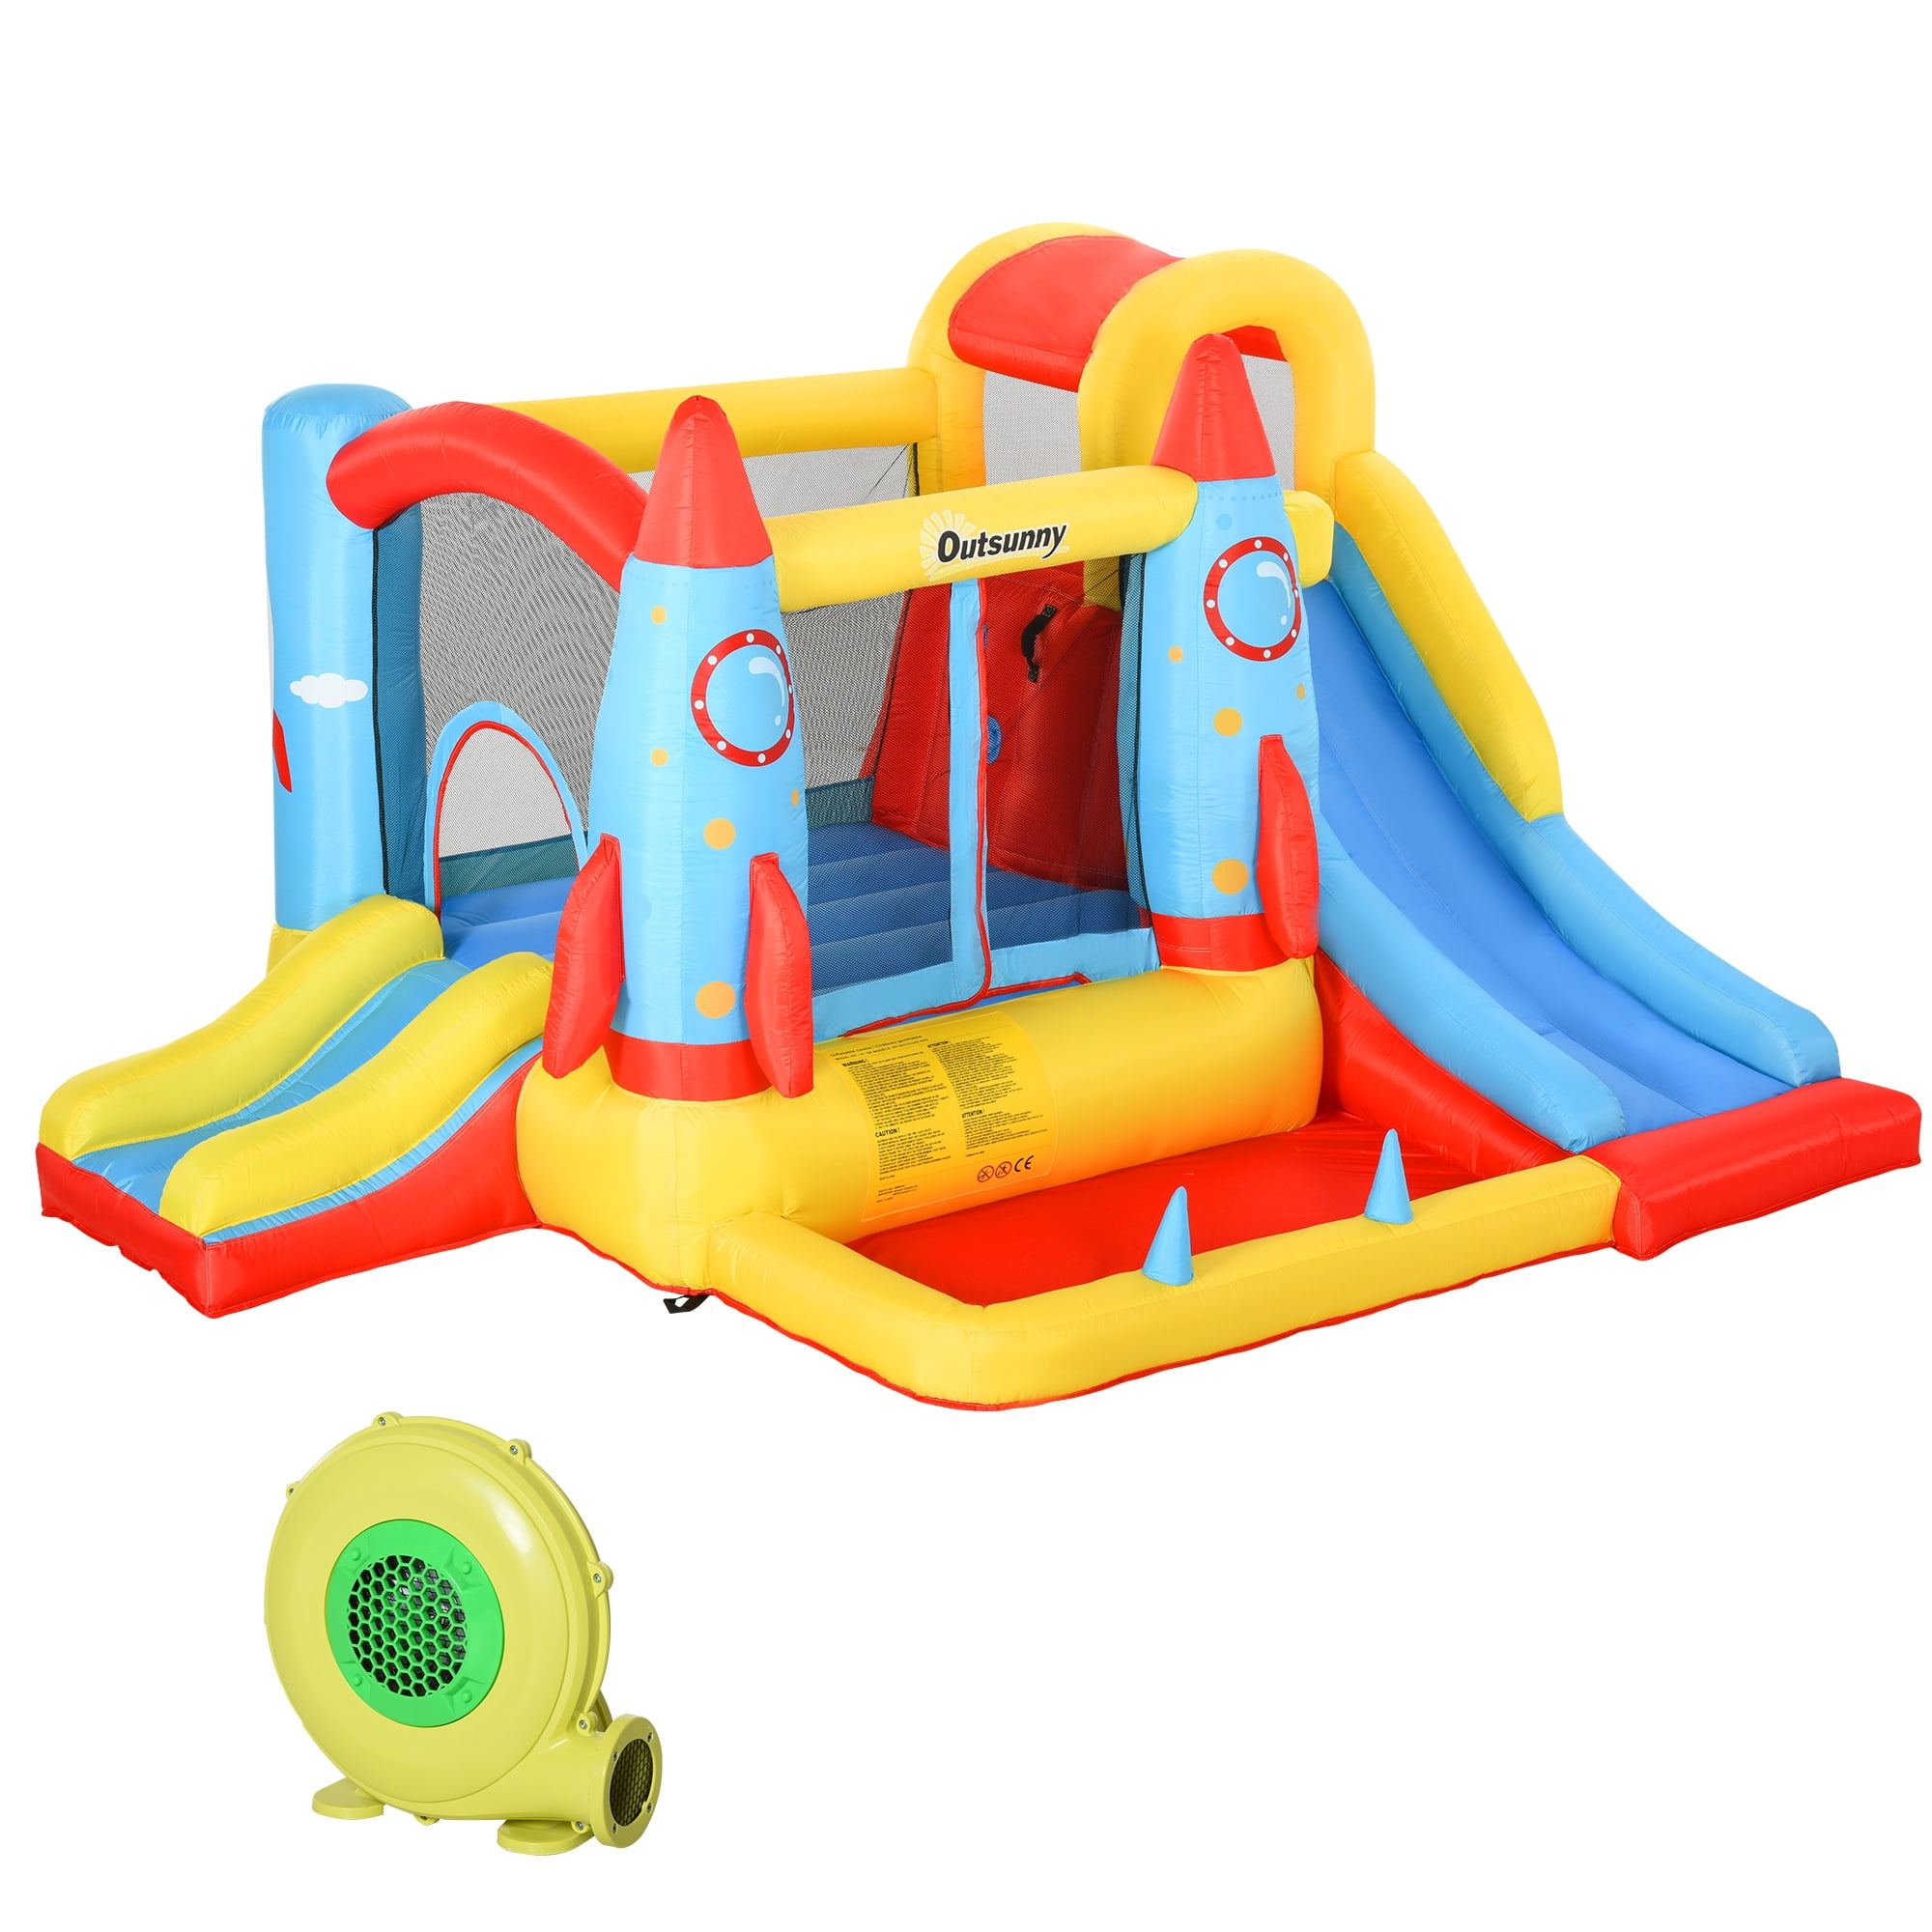 Jumping Area Plash Pool/Ball Pit Bounce House with Blower Kids Bouncer with Slide Inflatable Water Slide Climbing Wall Rocket Jumping Castle Bouncy House for Toddlers Including Carry Bag Repair Kit 